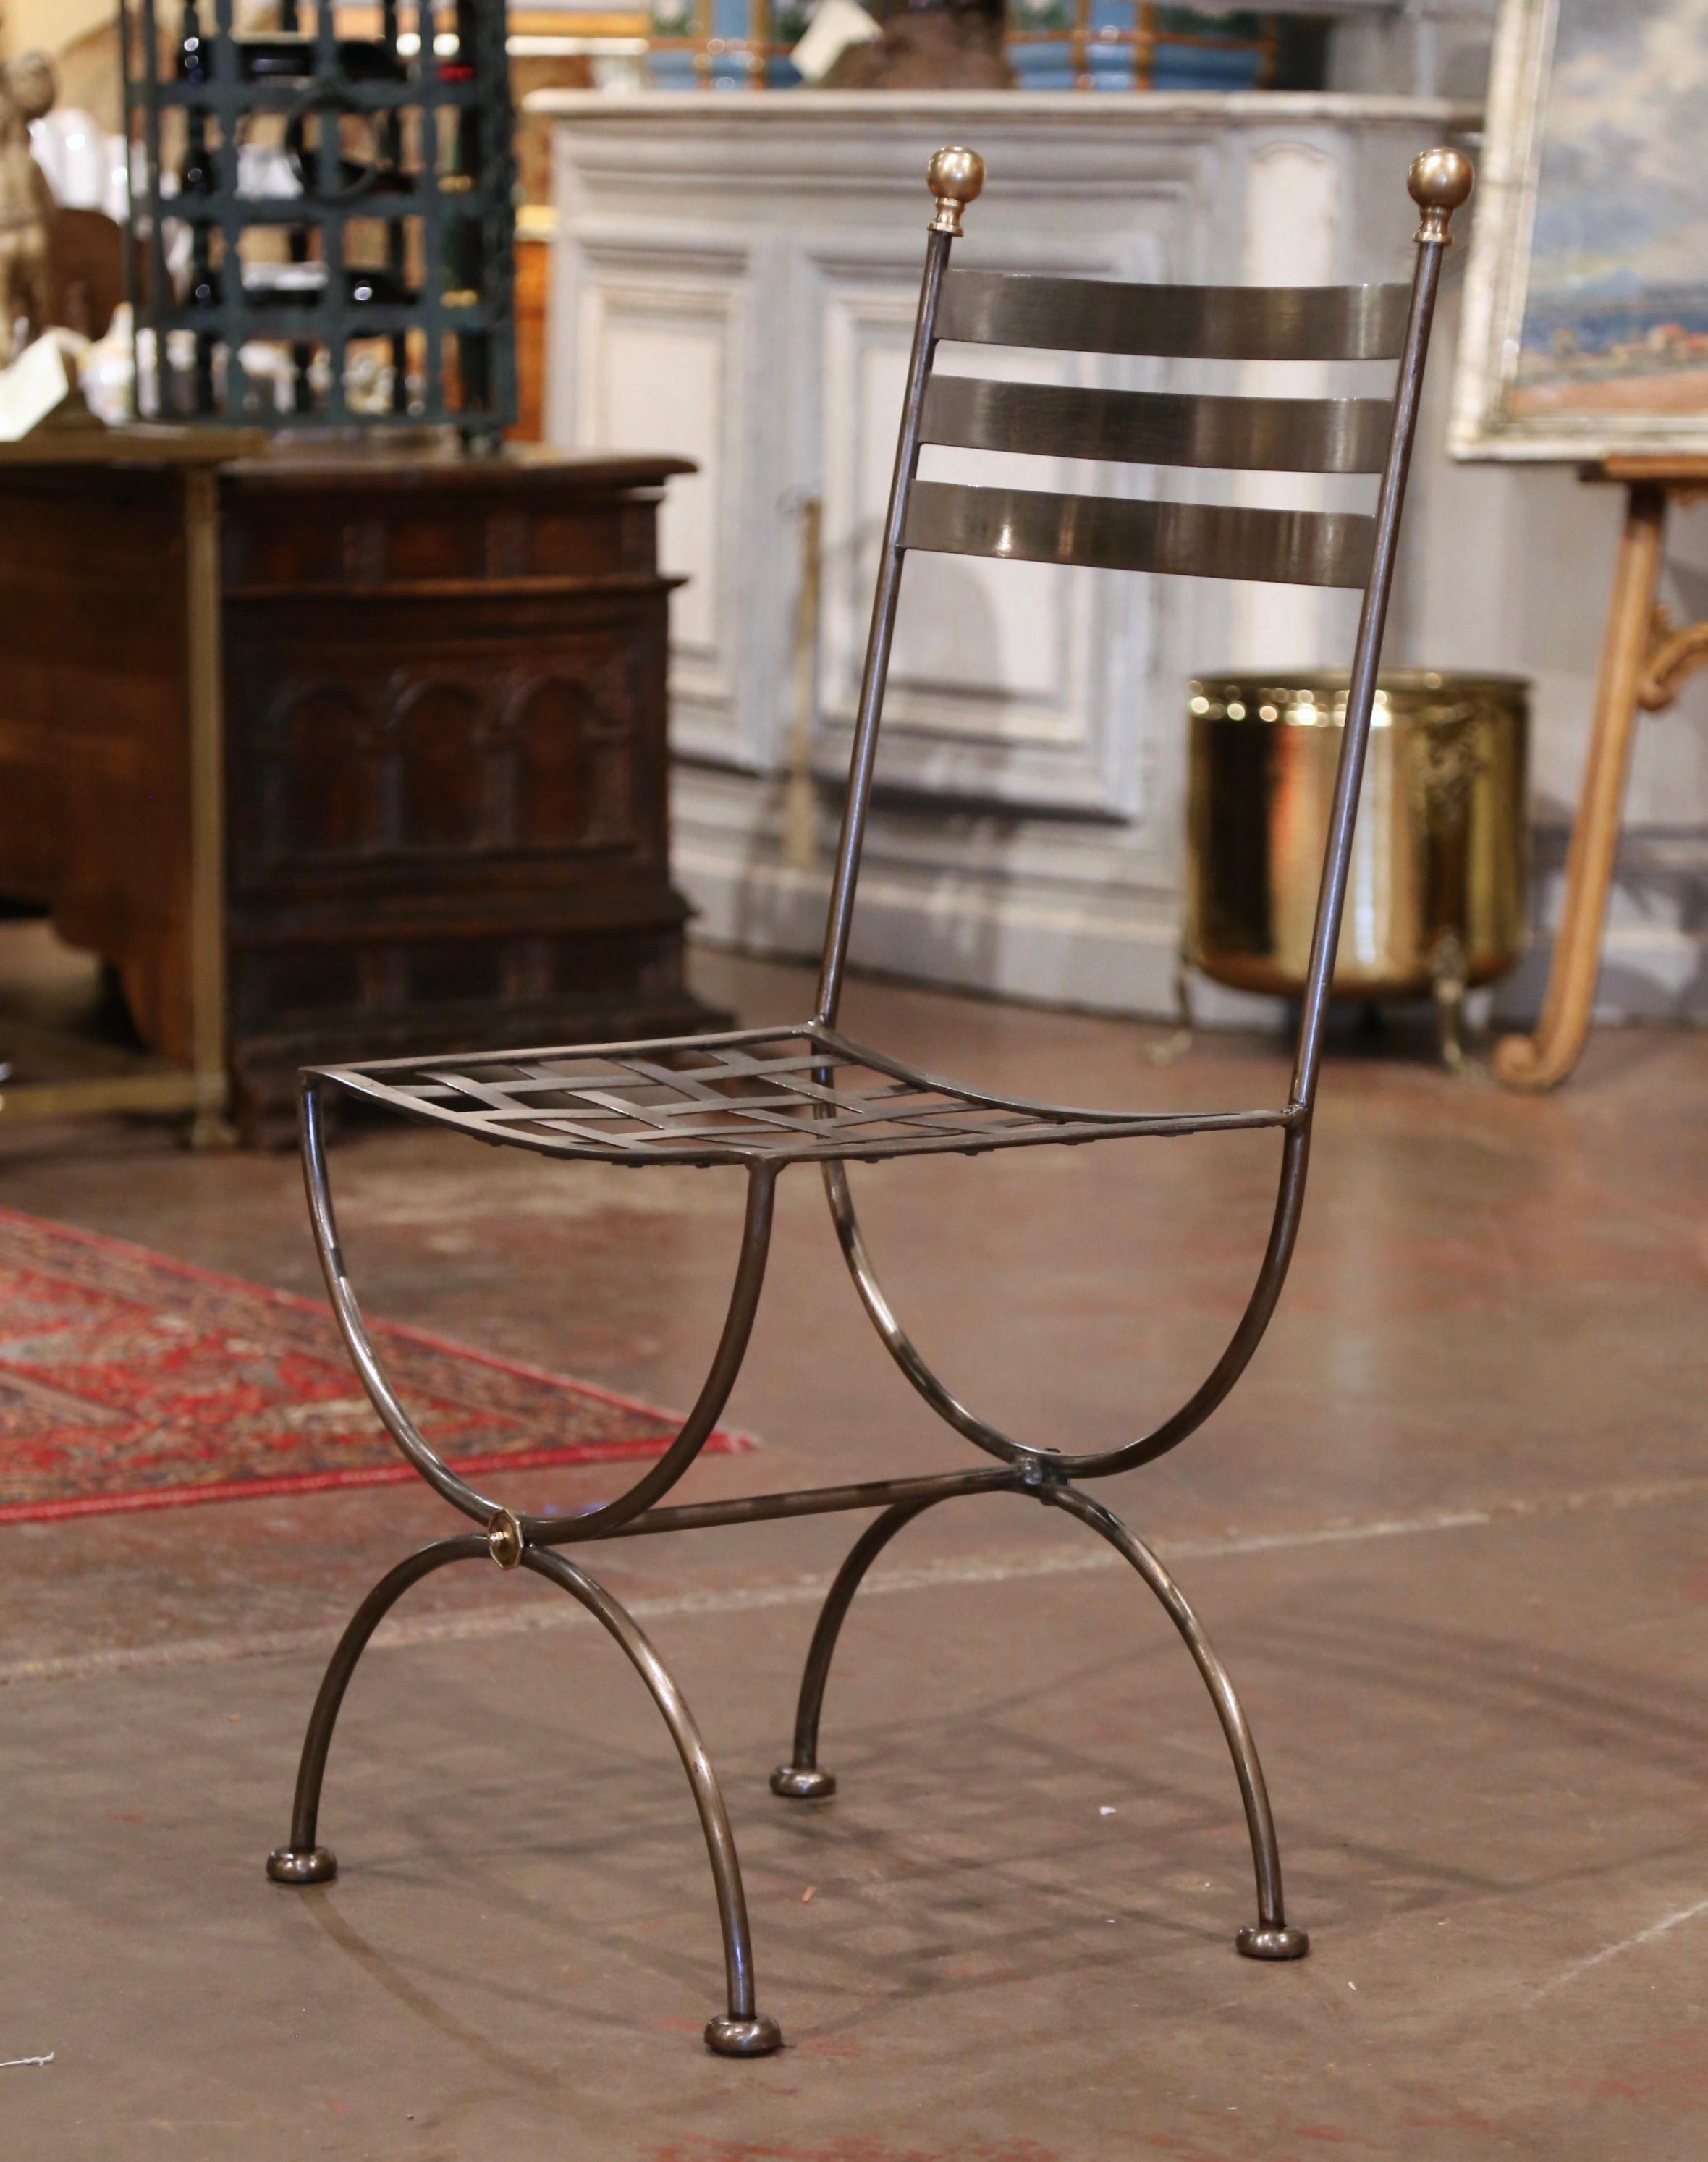 Place this elegant chair as a vanity seating, or outside on a patio! Crafted in France circa 1980 and made of wrought iron, the chair stands on forged Dagobert (or curule) legs and features three curved ladders on the back embellished with brass